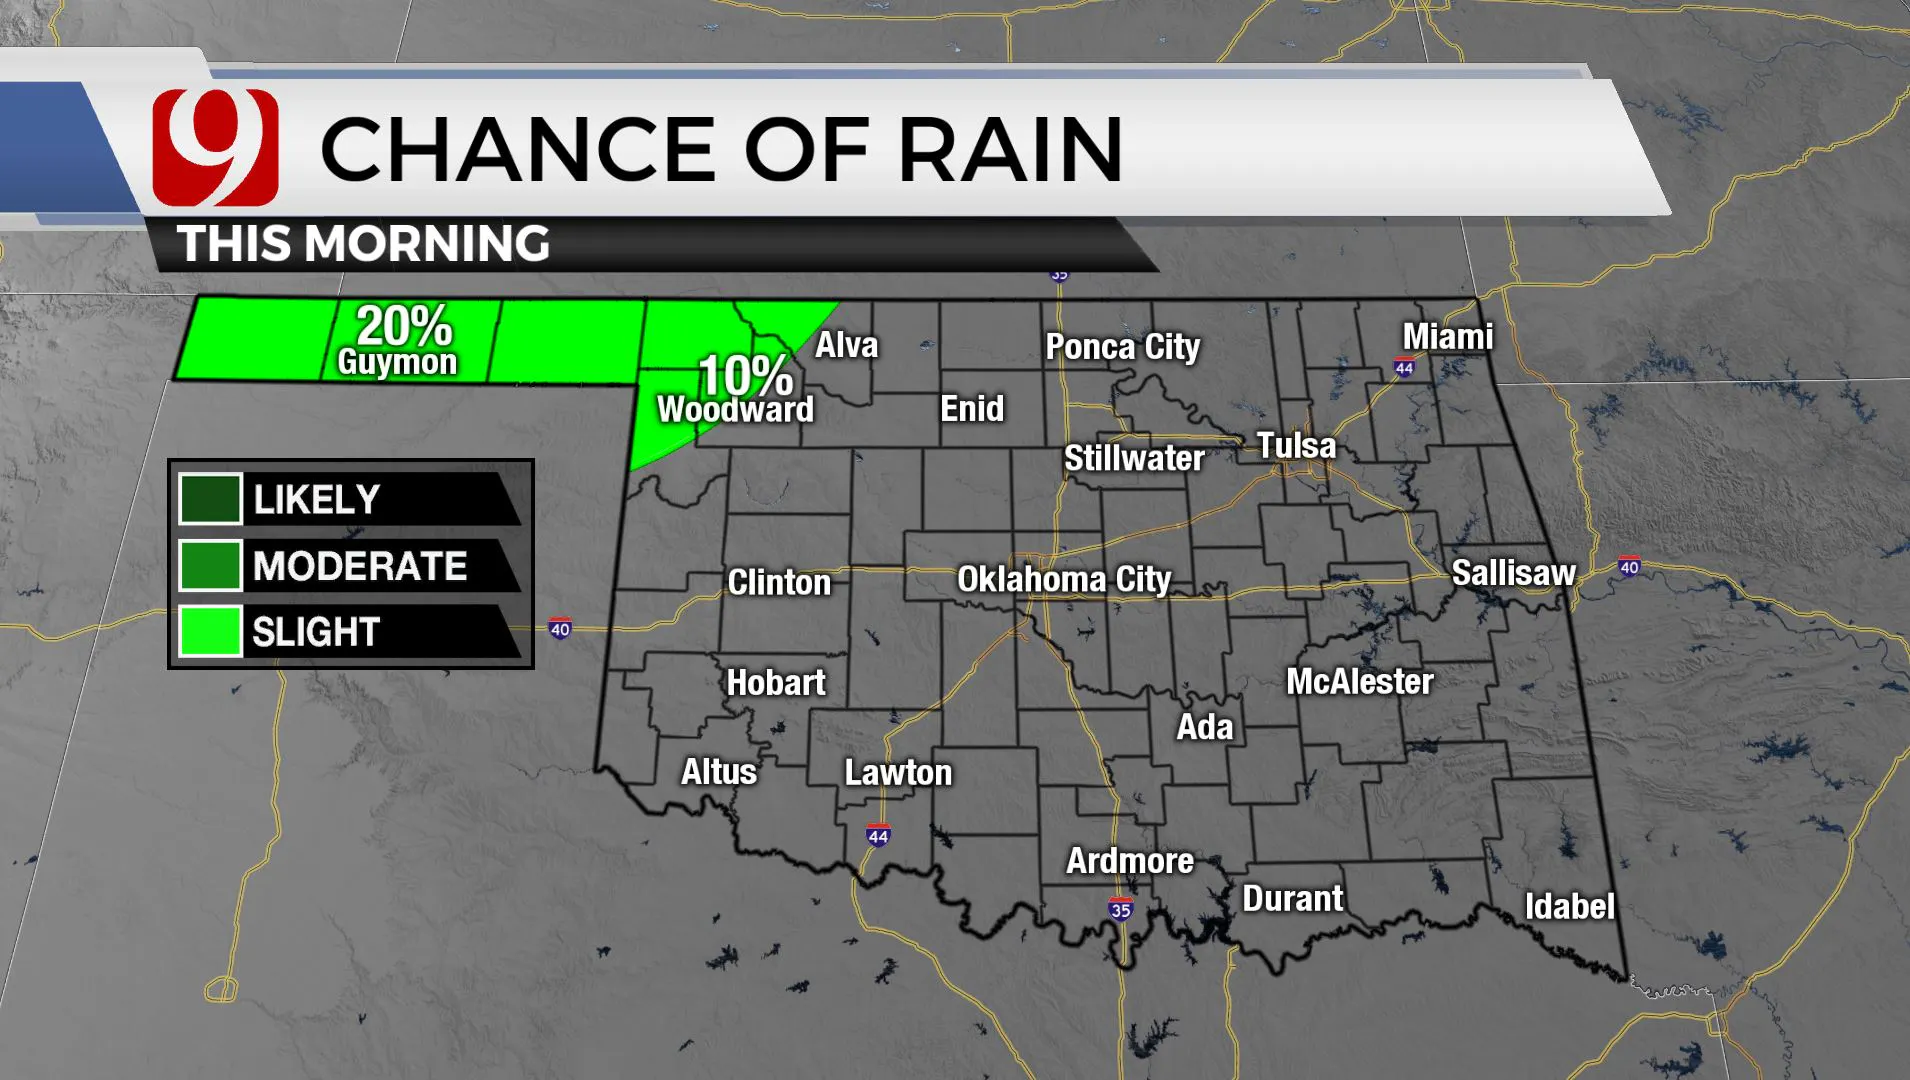 Chances of rain across the state.